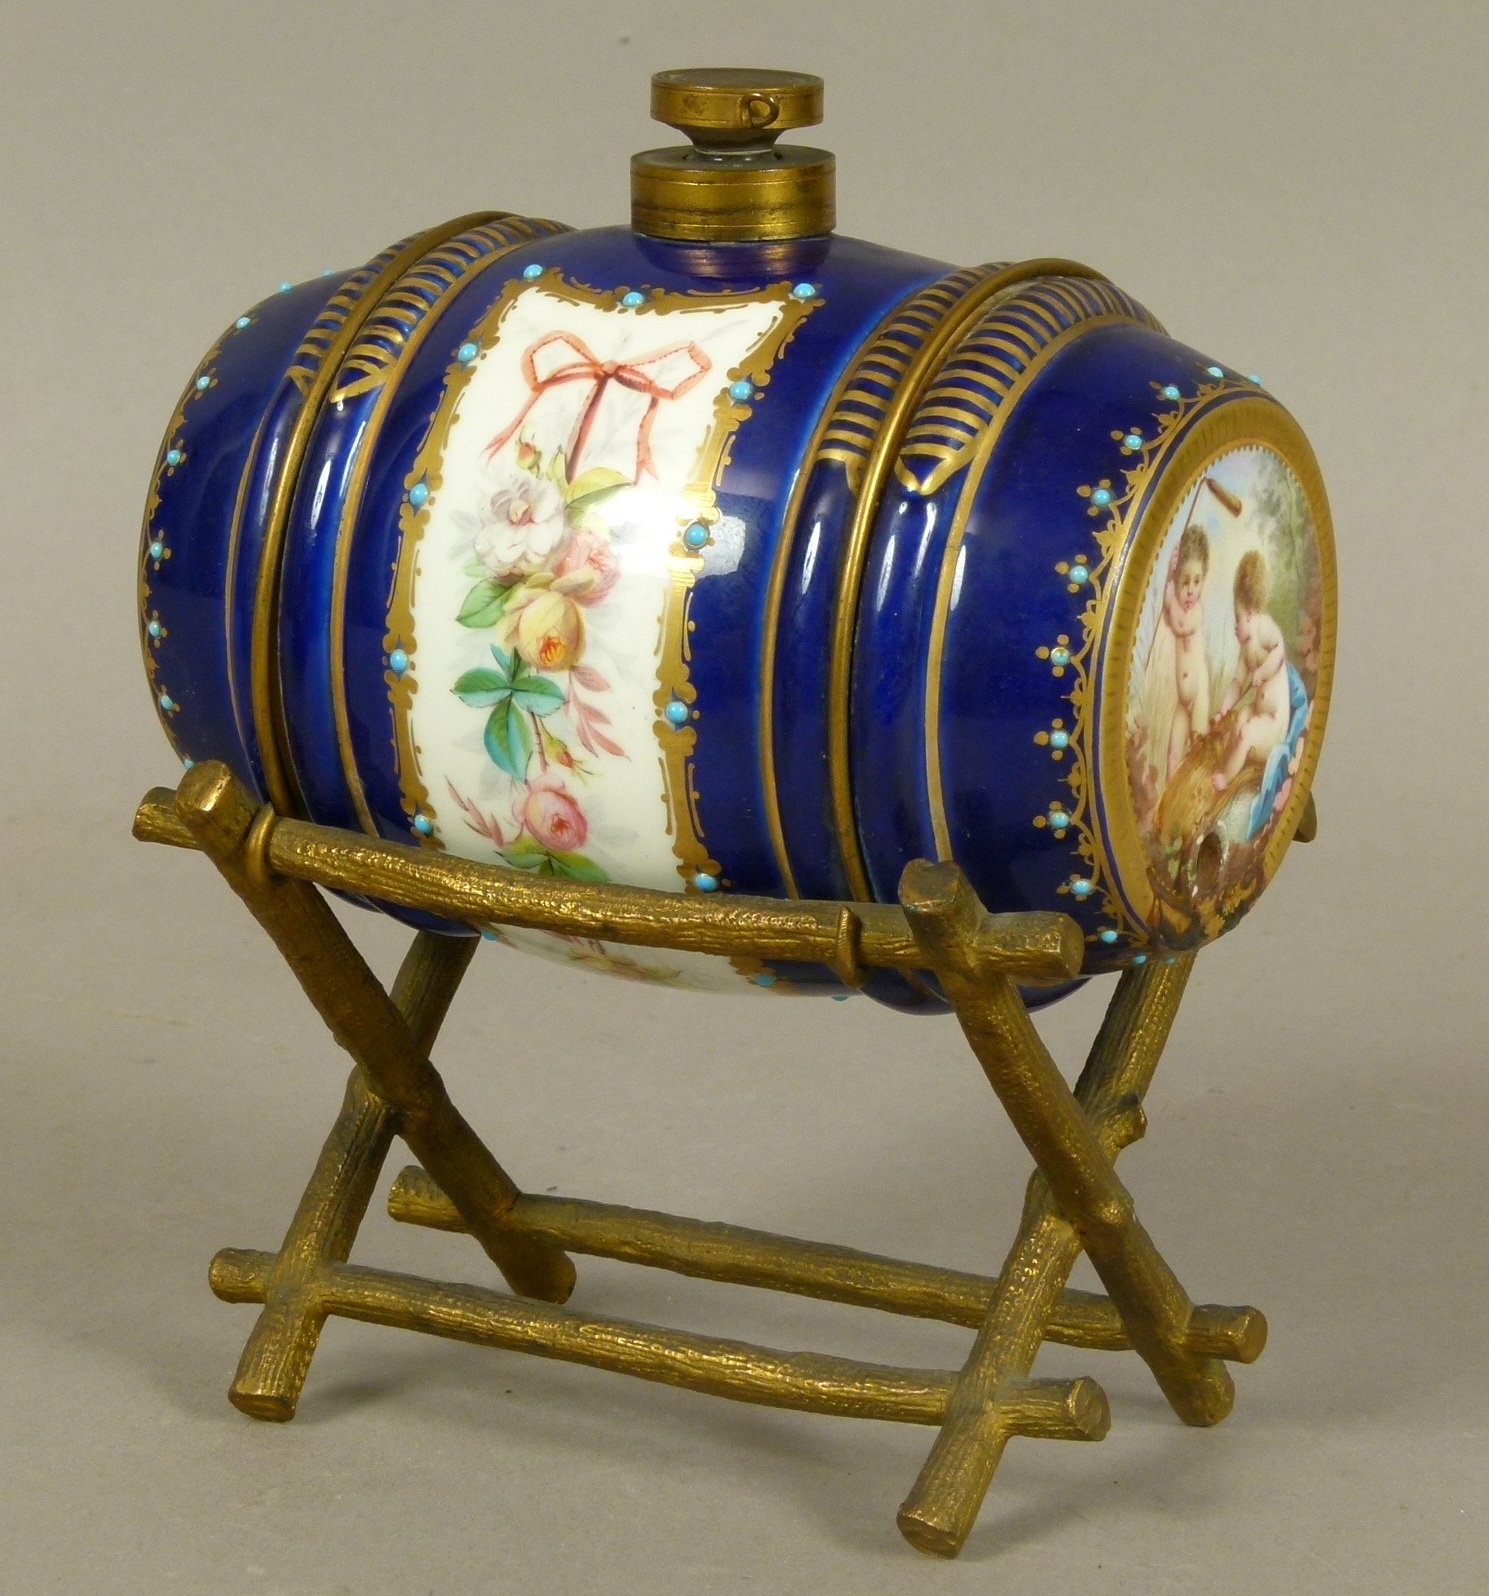 A LATE 19TH CENTURY FRENCH PORCELAIN AND GILT-BRONZE MOUNTED SPIRIT BARREL, the porcelain barrel